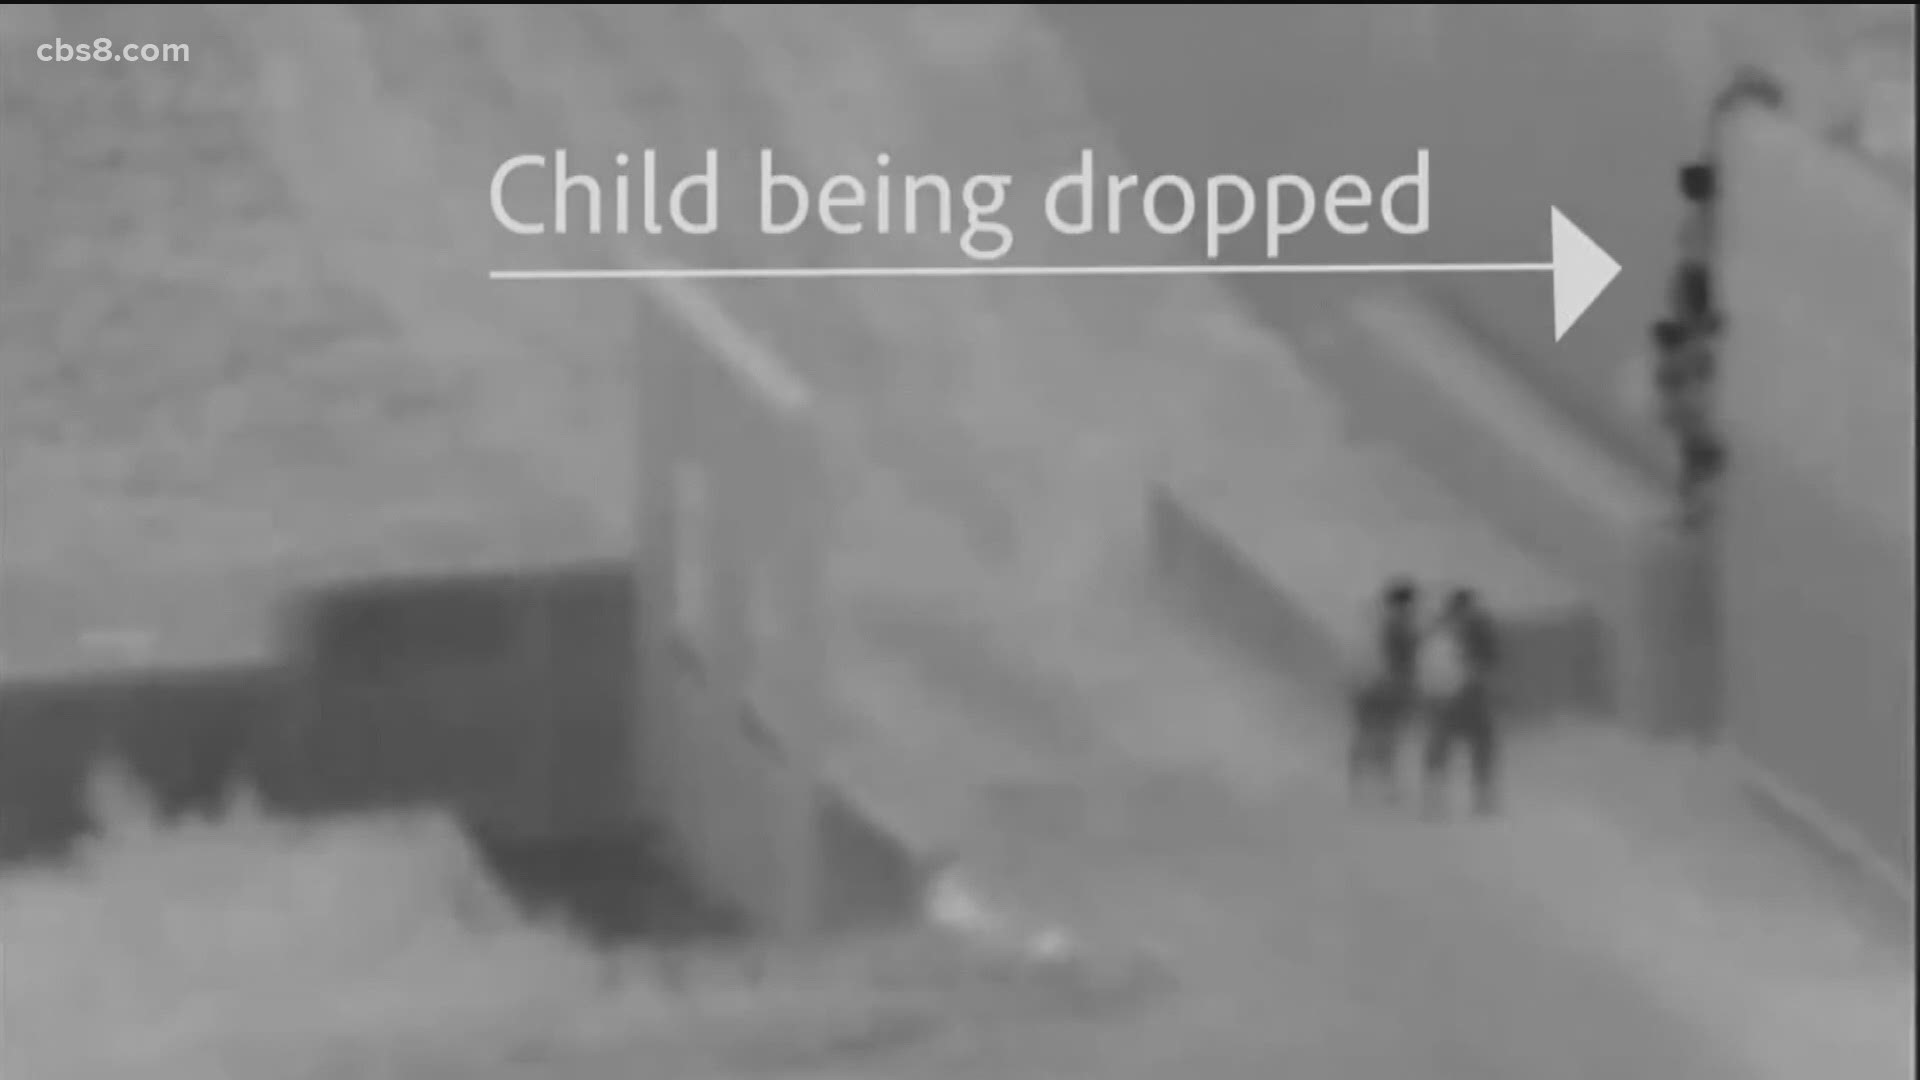 San Diego Sector Border Patrol agents said they witnessed the incident unfold as a toddler was dropped from the top of the border wall near Imperial Beach.